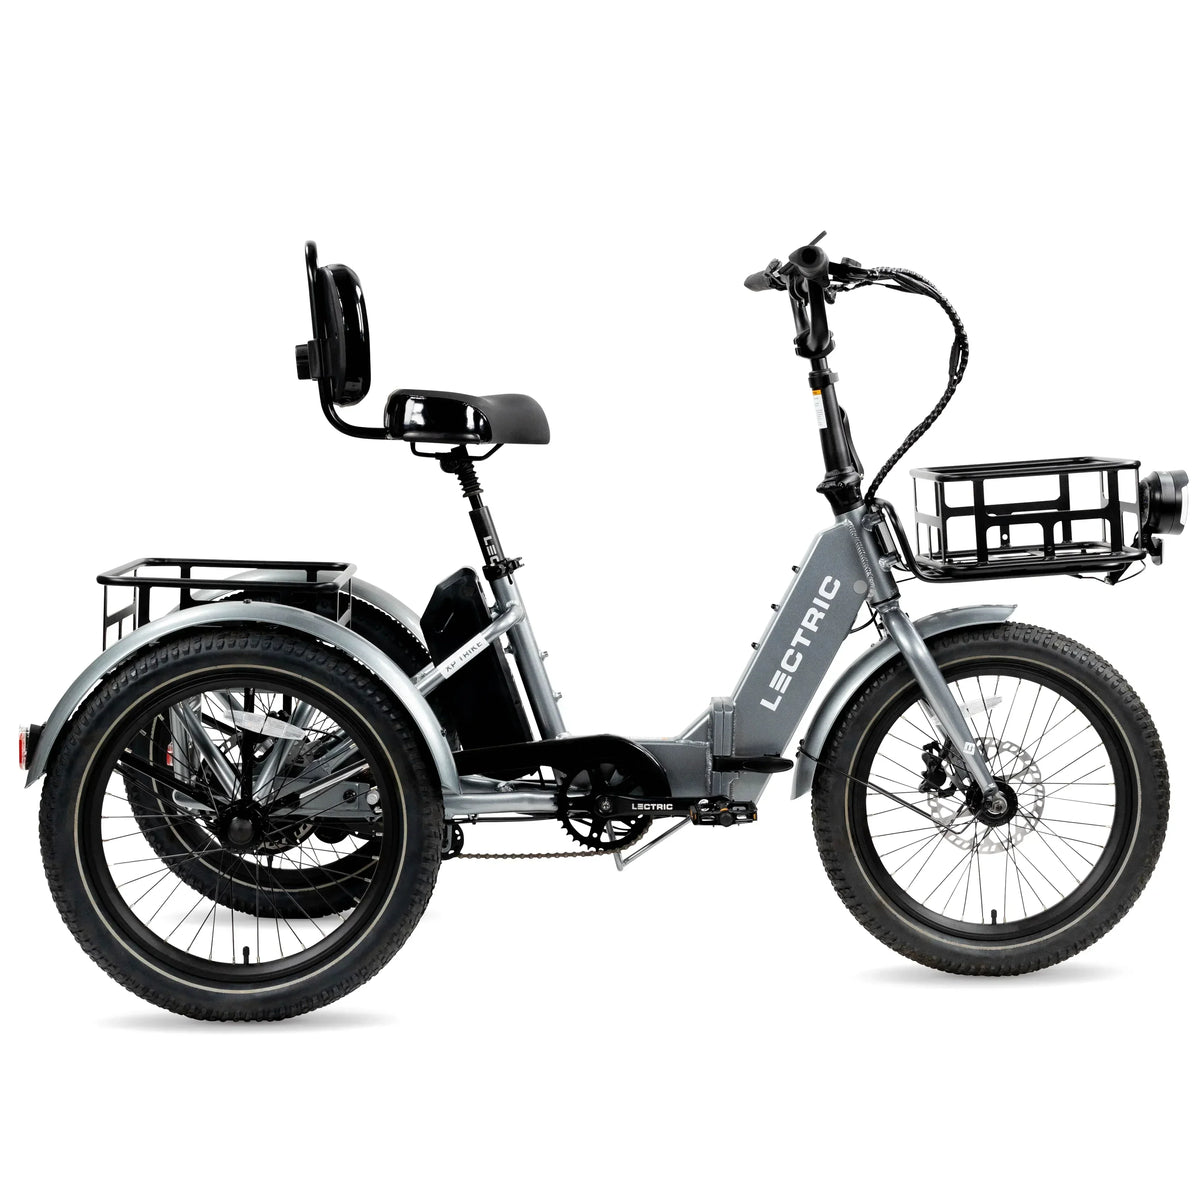 Lectric XP Trike | Adult Folding 3 Wheel Electric Tricycle | Best Affordable Fully Assembled Lightweight Class 2 Motorized eTrike | Great for Seniors